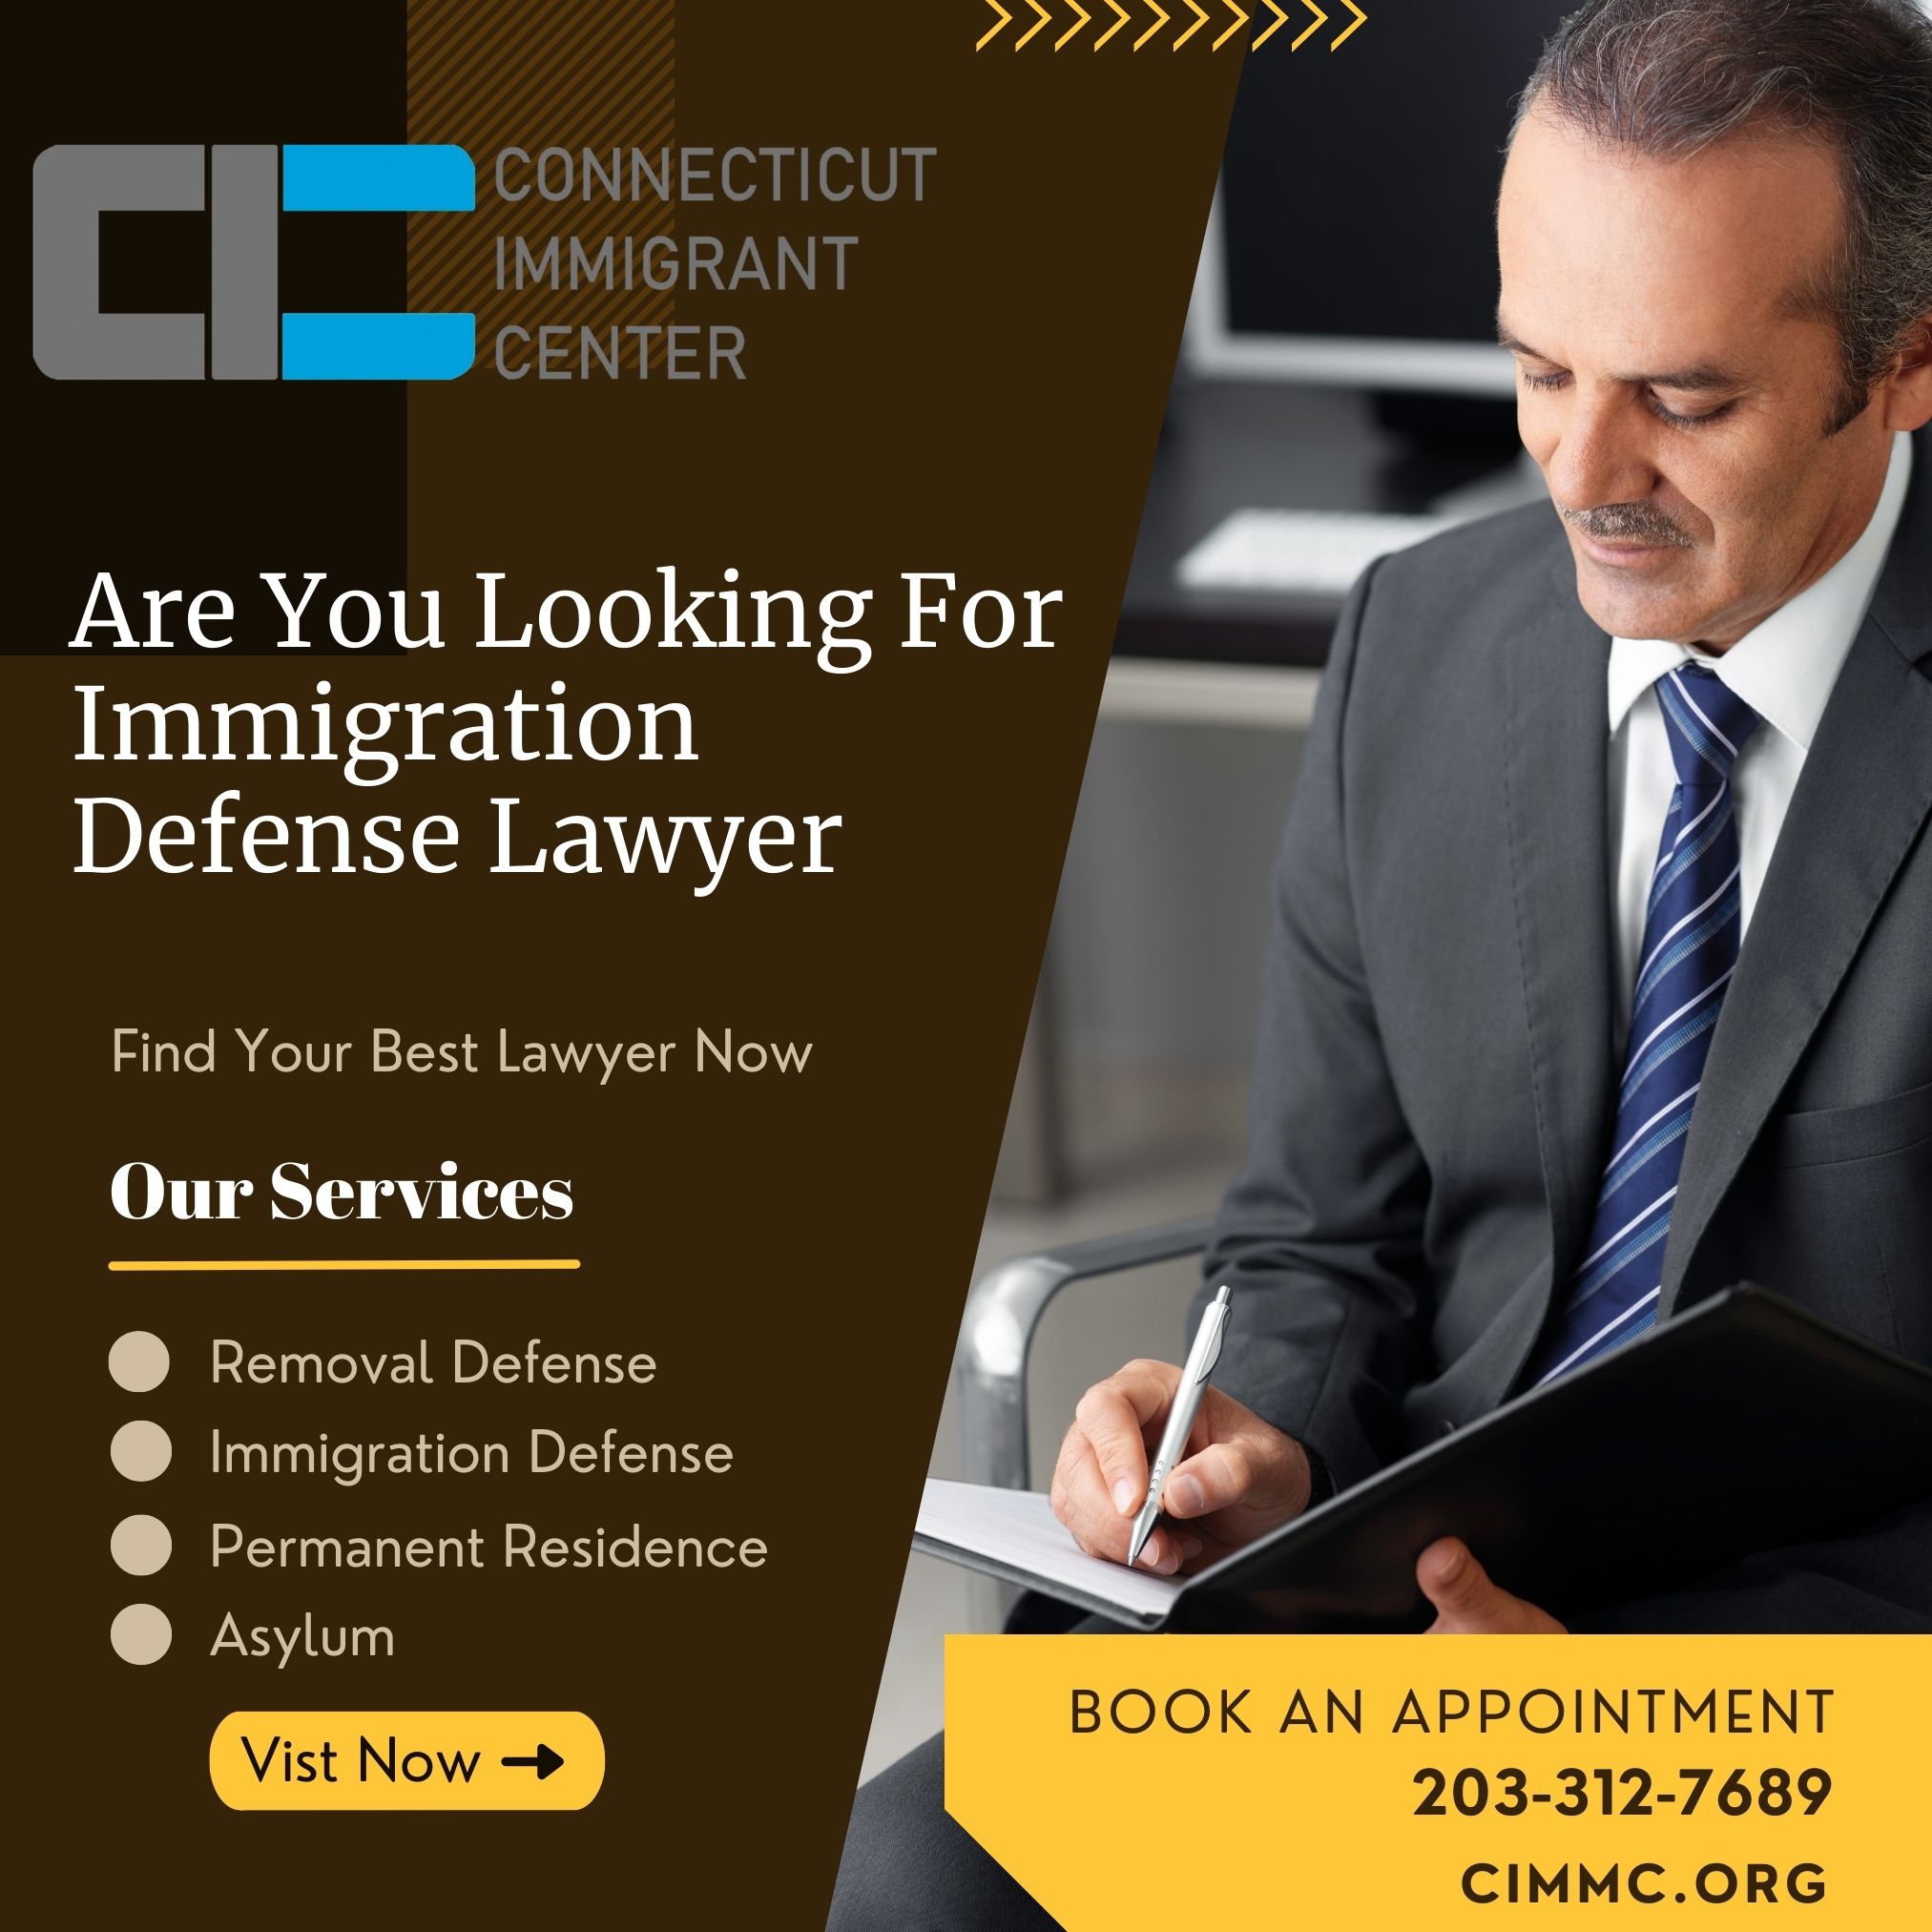 Immigration Defense Lawyer - Connecticut - Hartford ID1514400 4